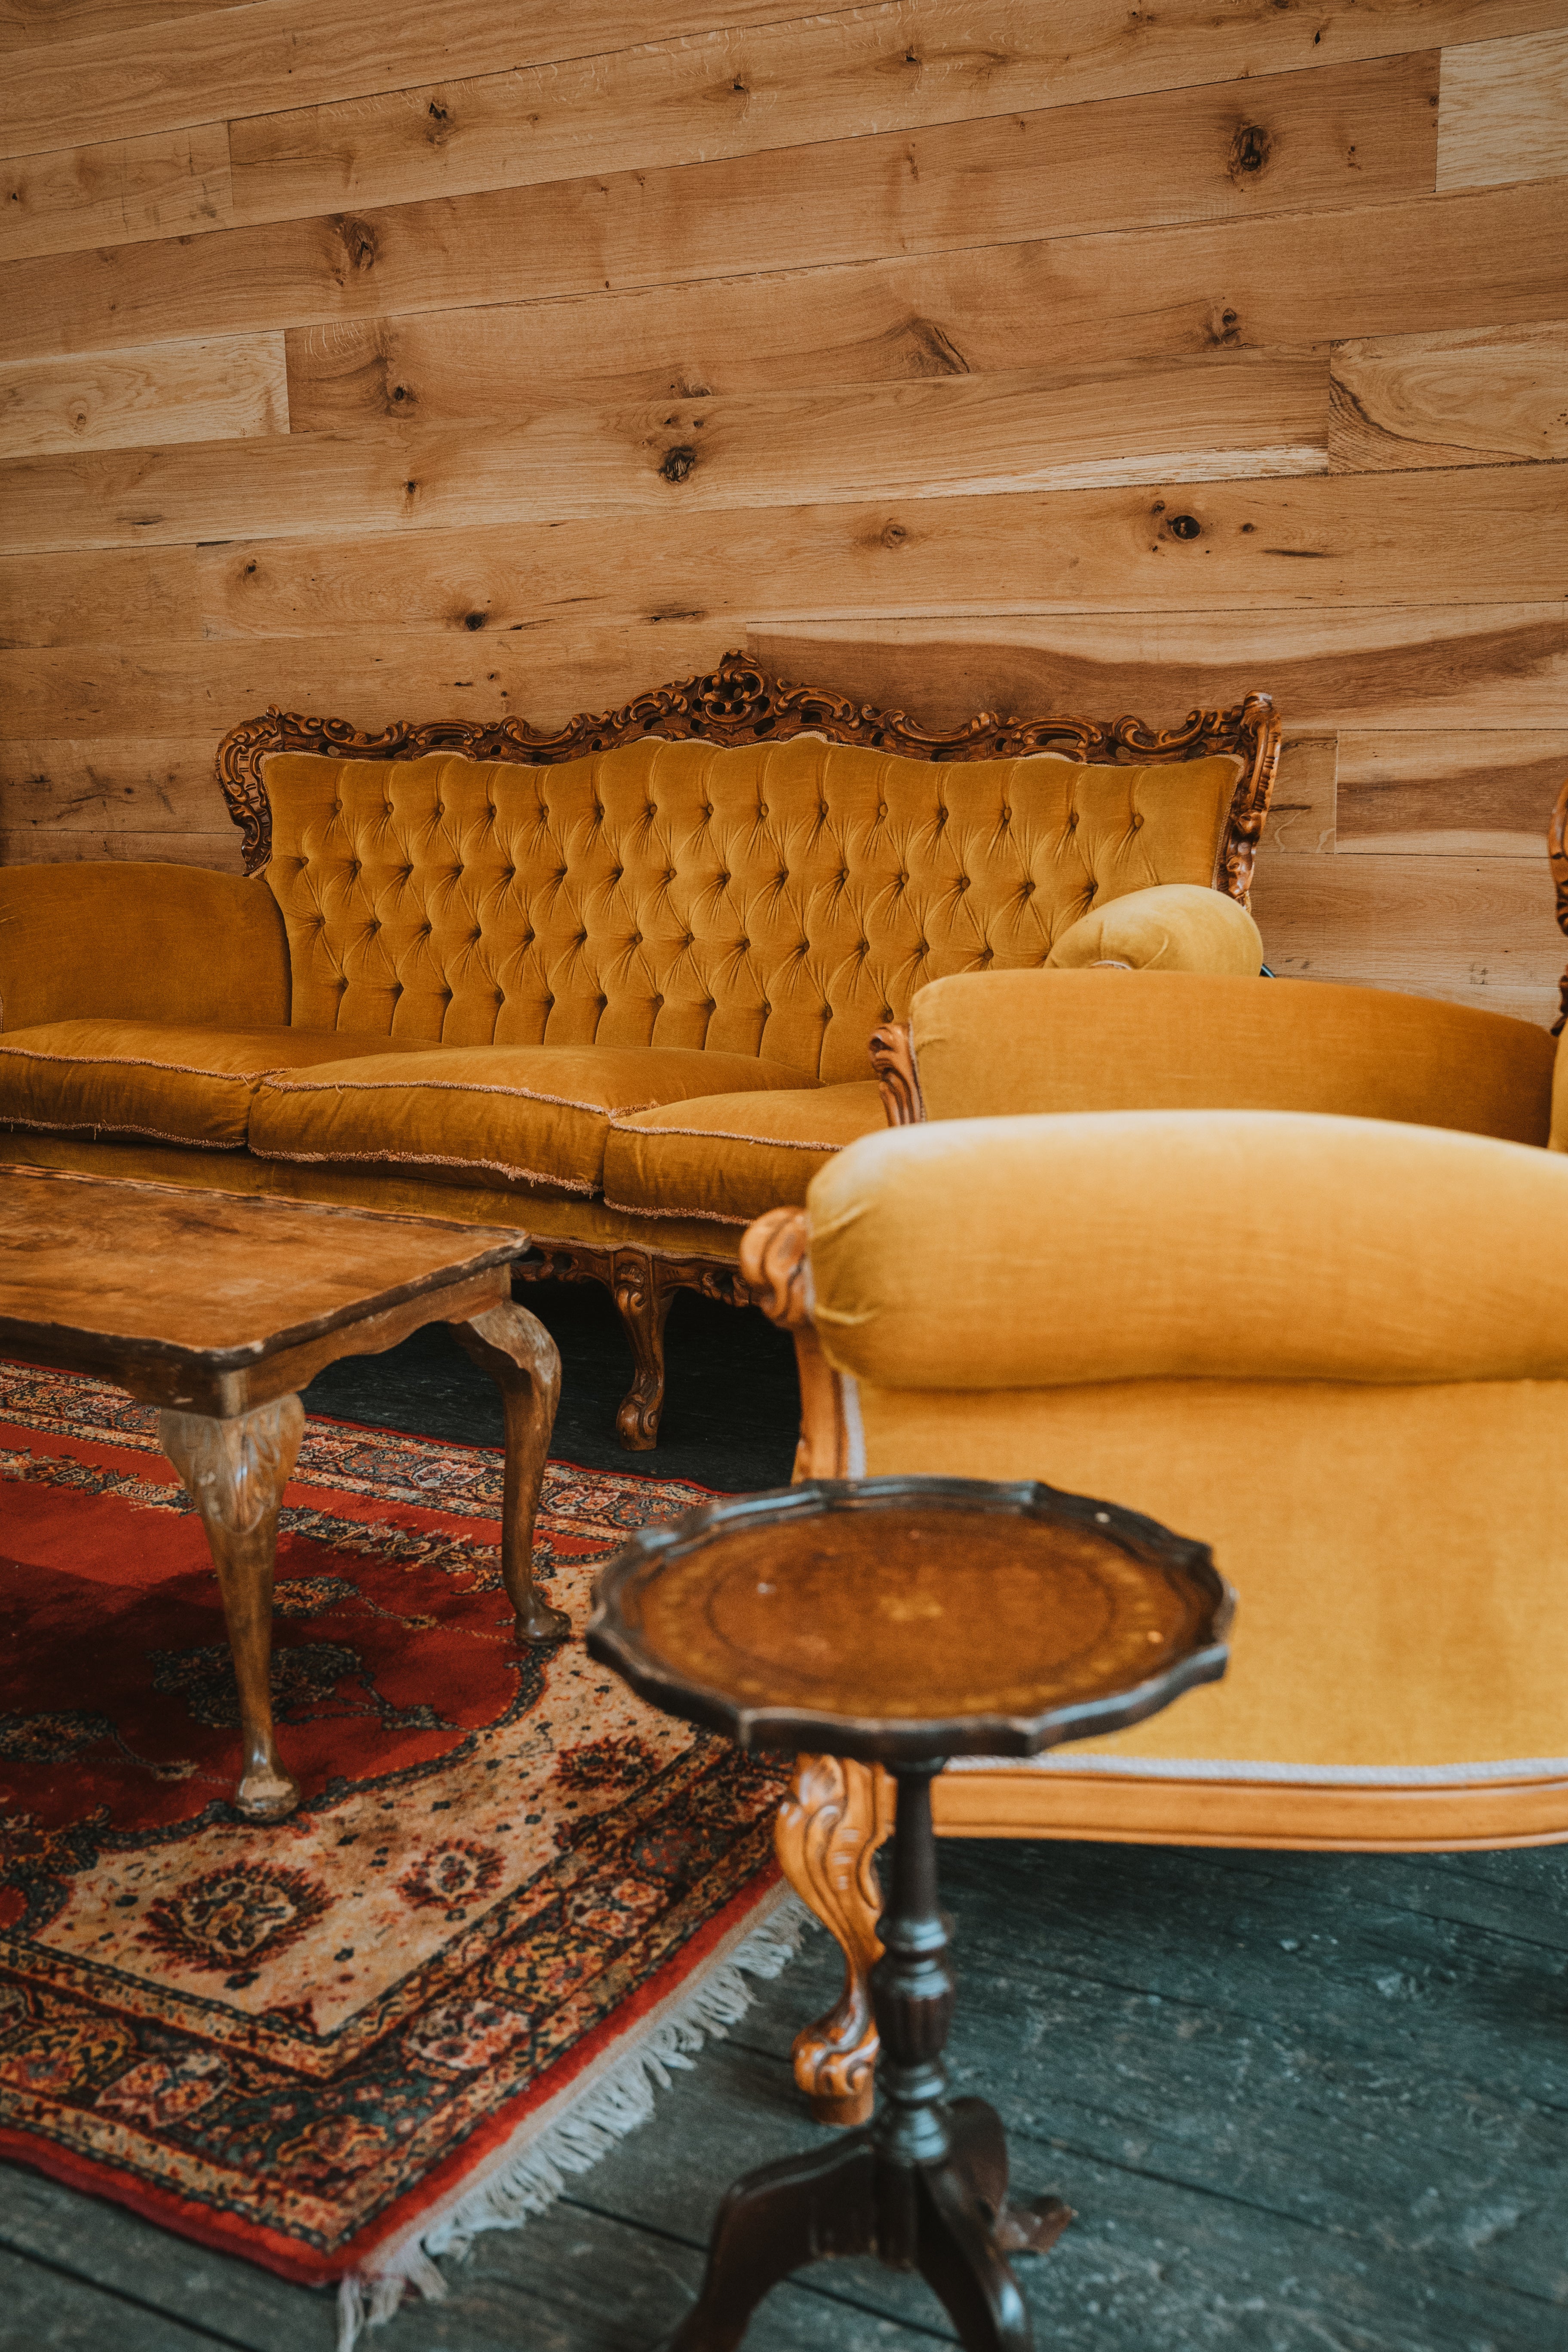 'Glorious Golden' Vintage Seating Area